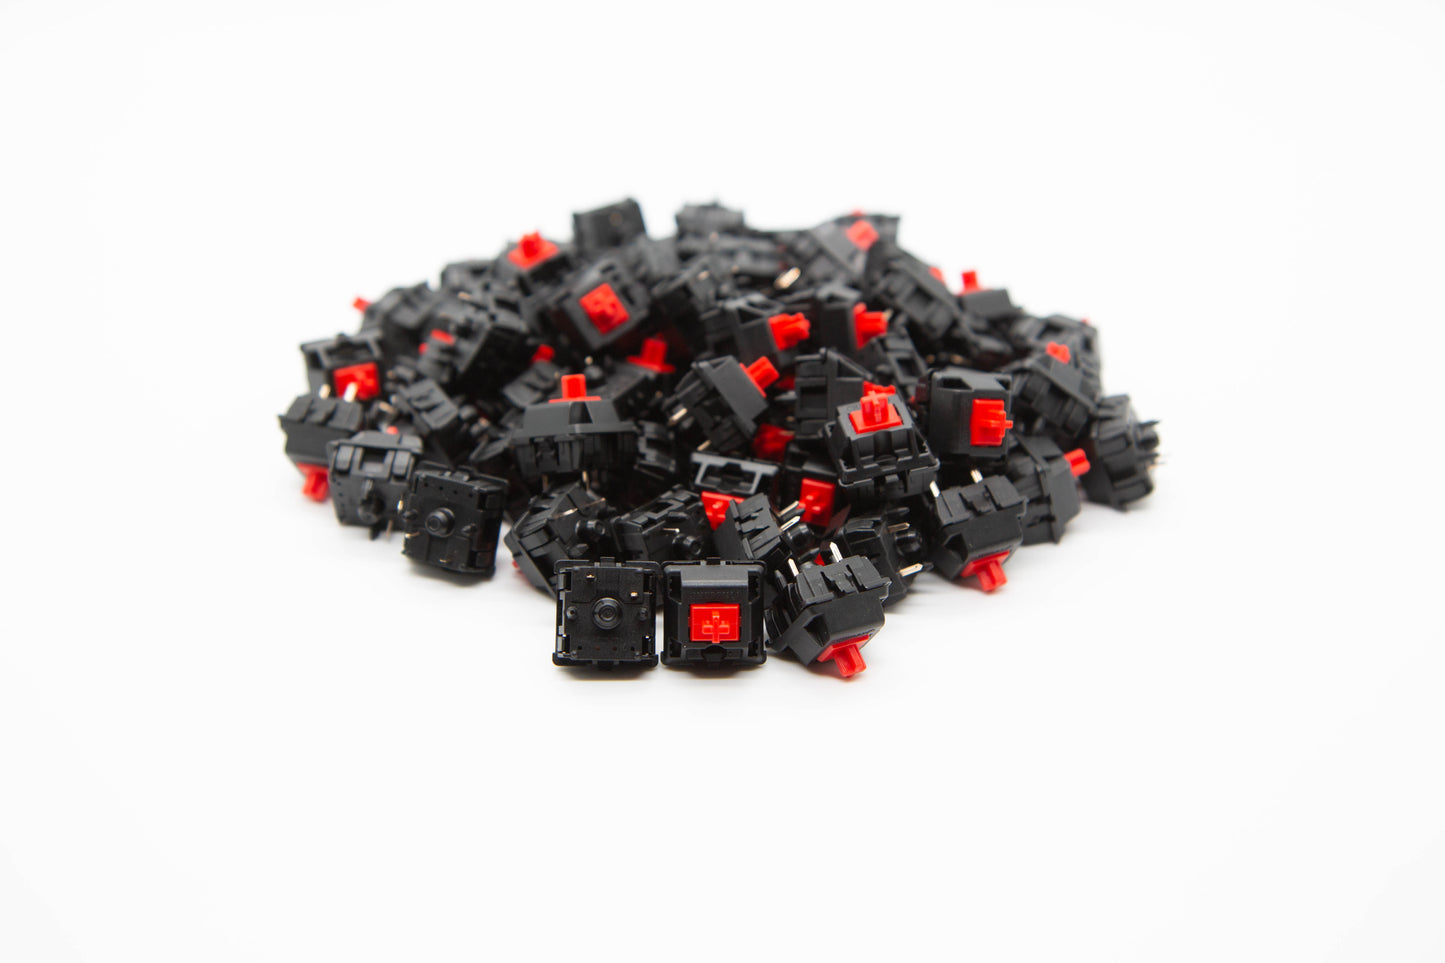 Close up shot of a pile of Cherry Red mechanical keyboard switches featuring black housing and red stems